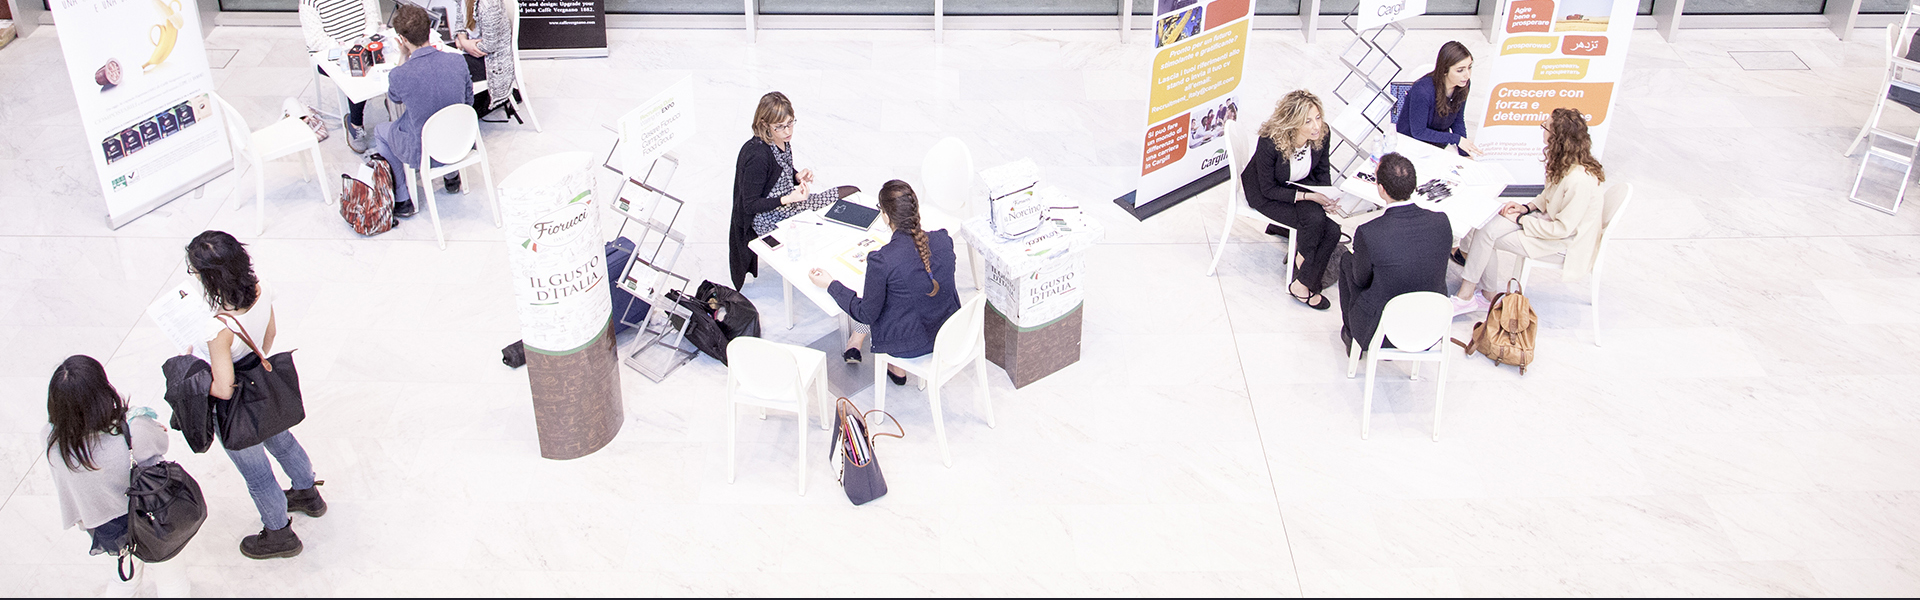 Learn More About the Bocconi Network